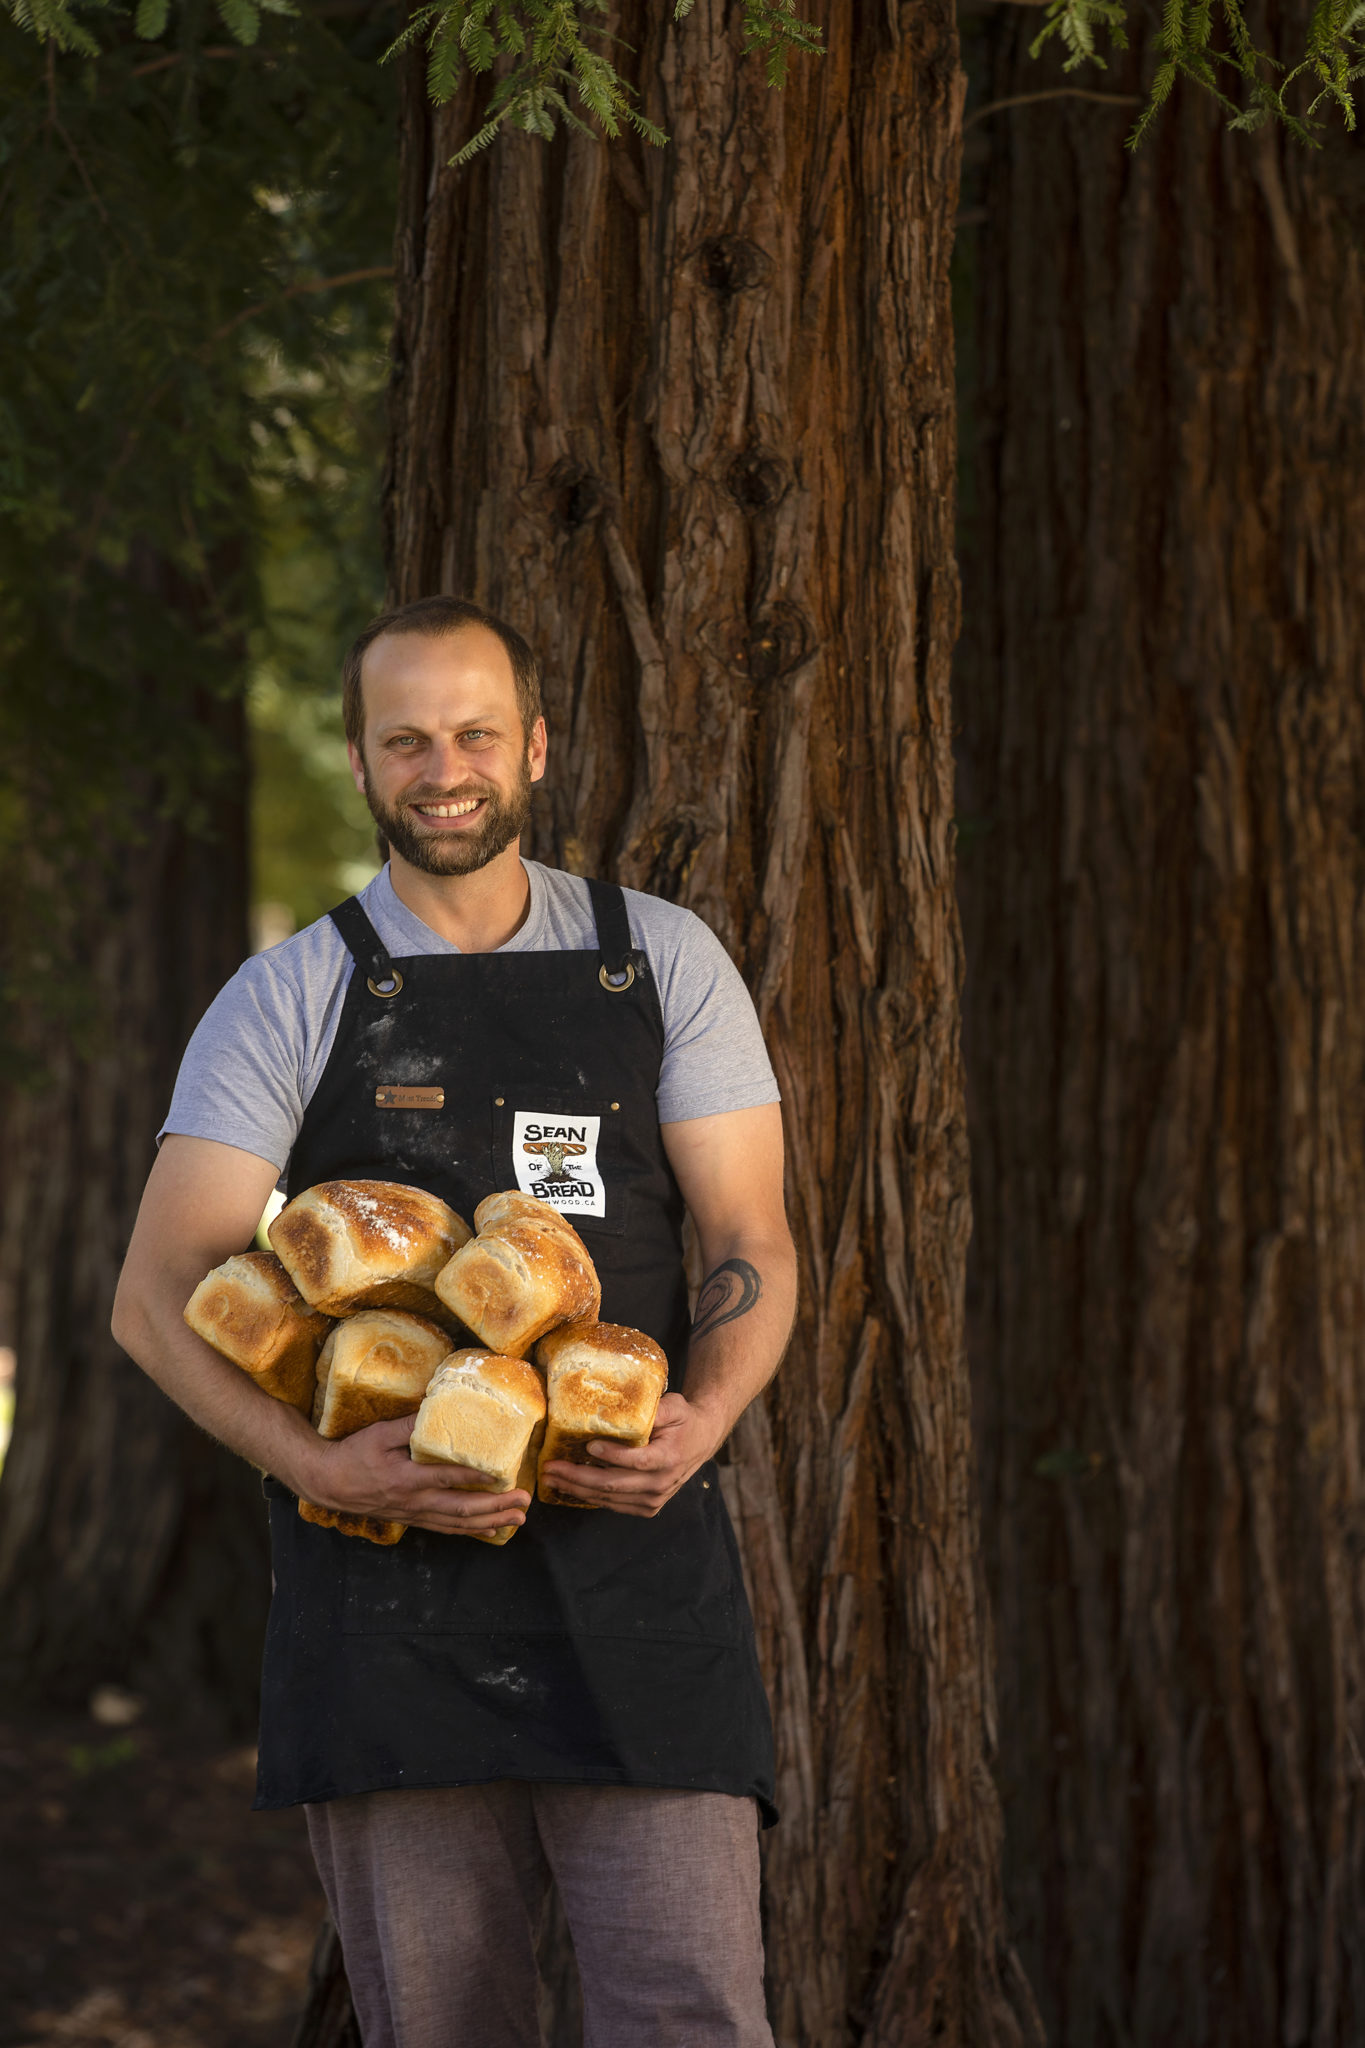 Sean Perry, owner of Sean of the Bread, bakes a different style of bread each day in his Kenwood home bakery. (Photo by John Burgess/The Press Democrat)